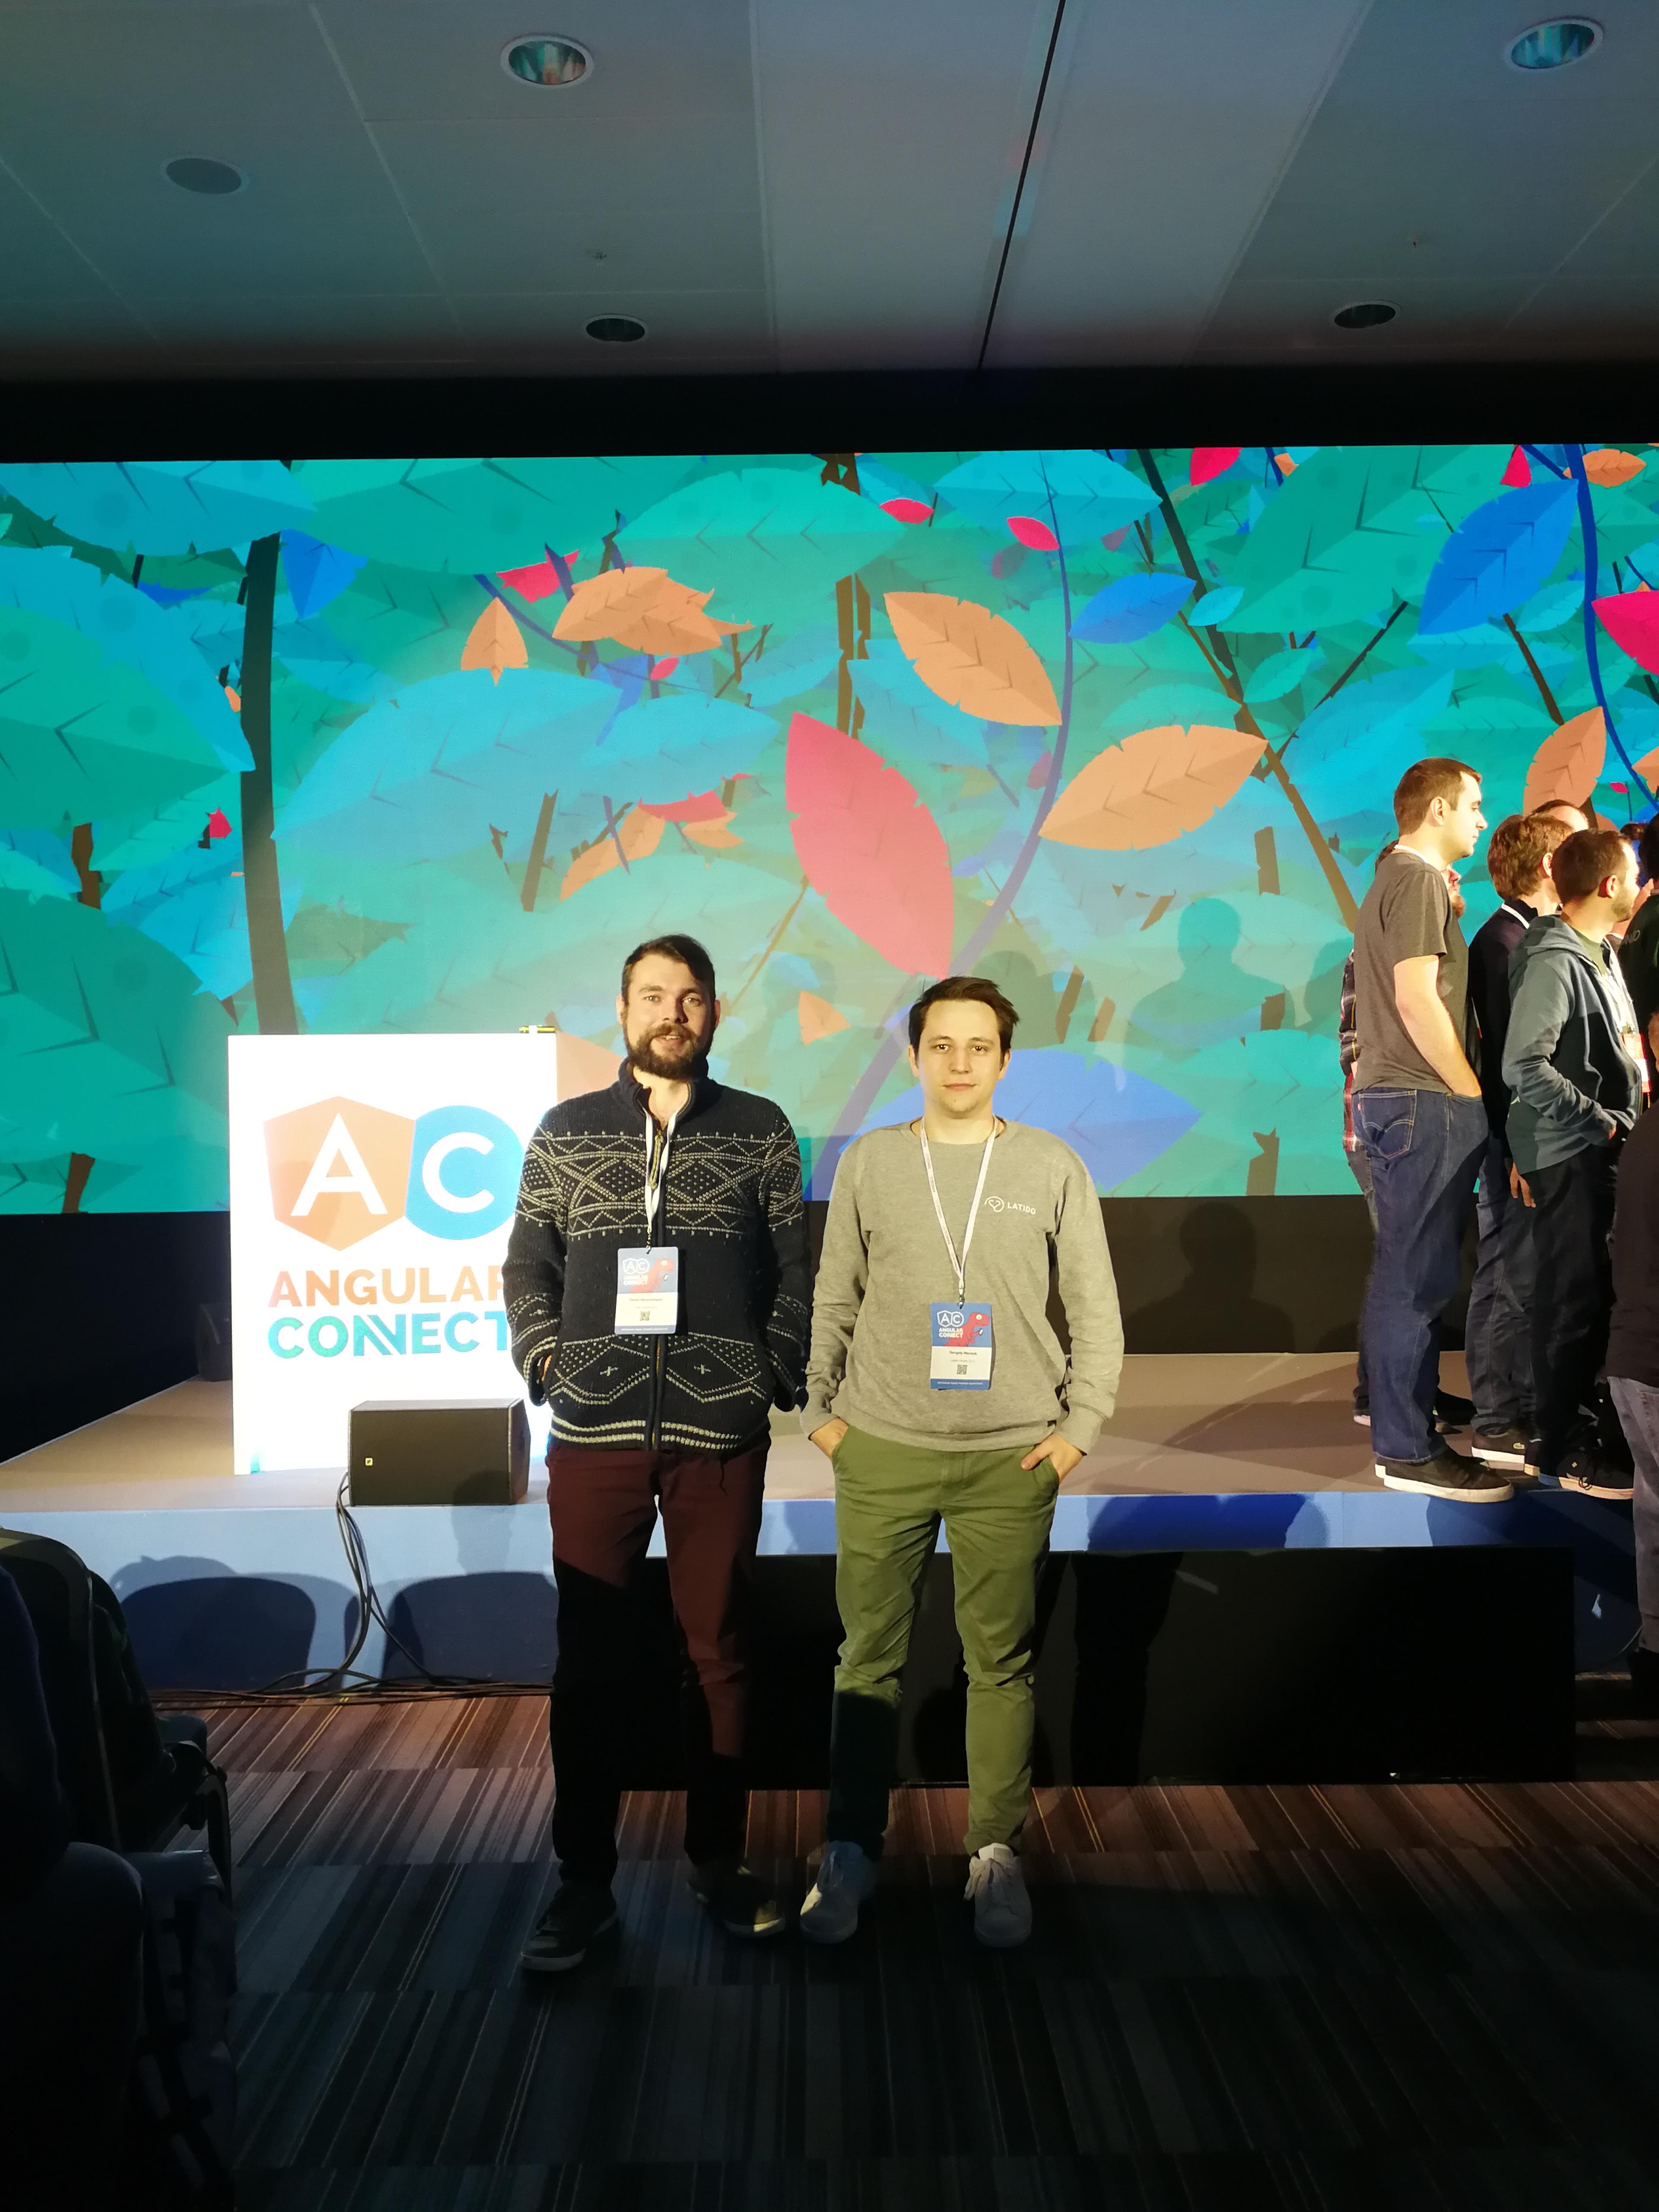 AngularConnect 2018 in London